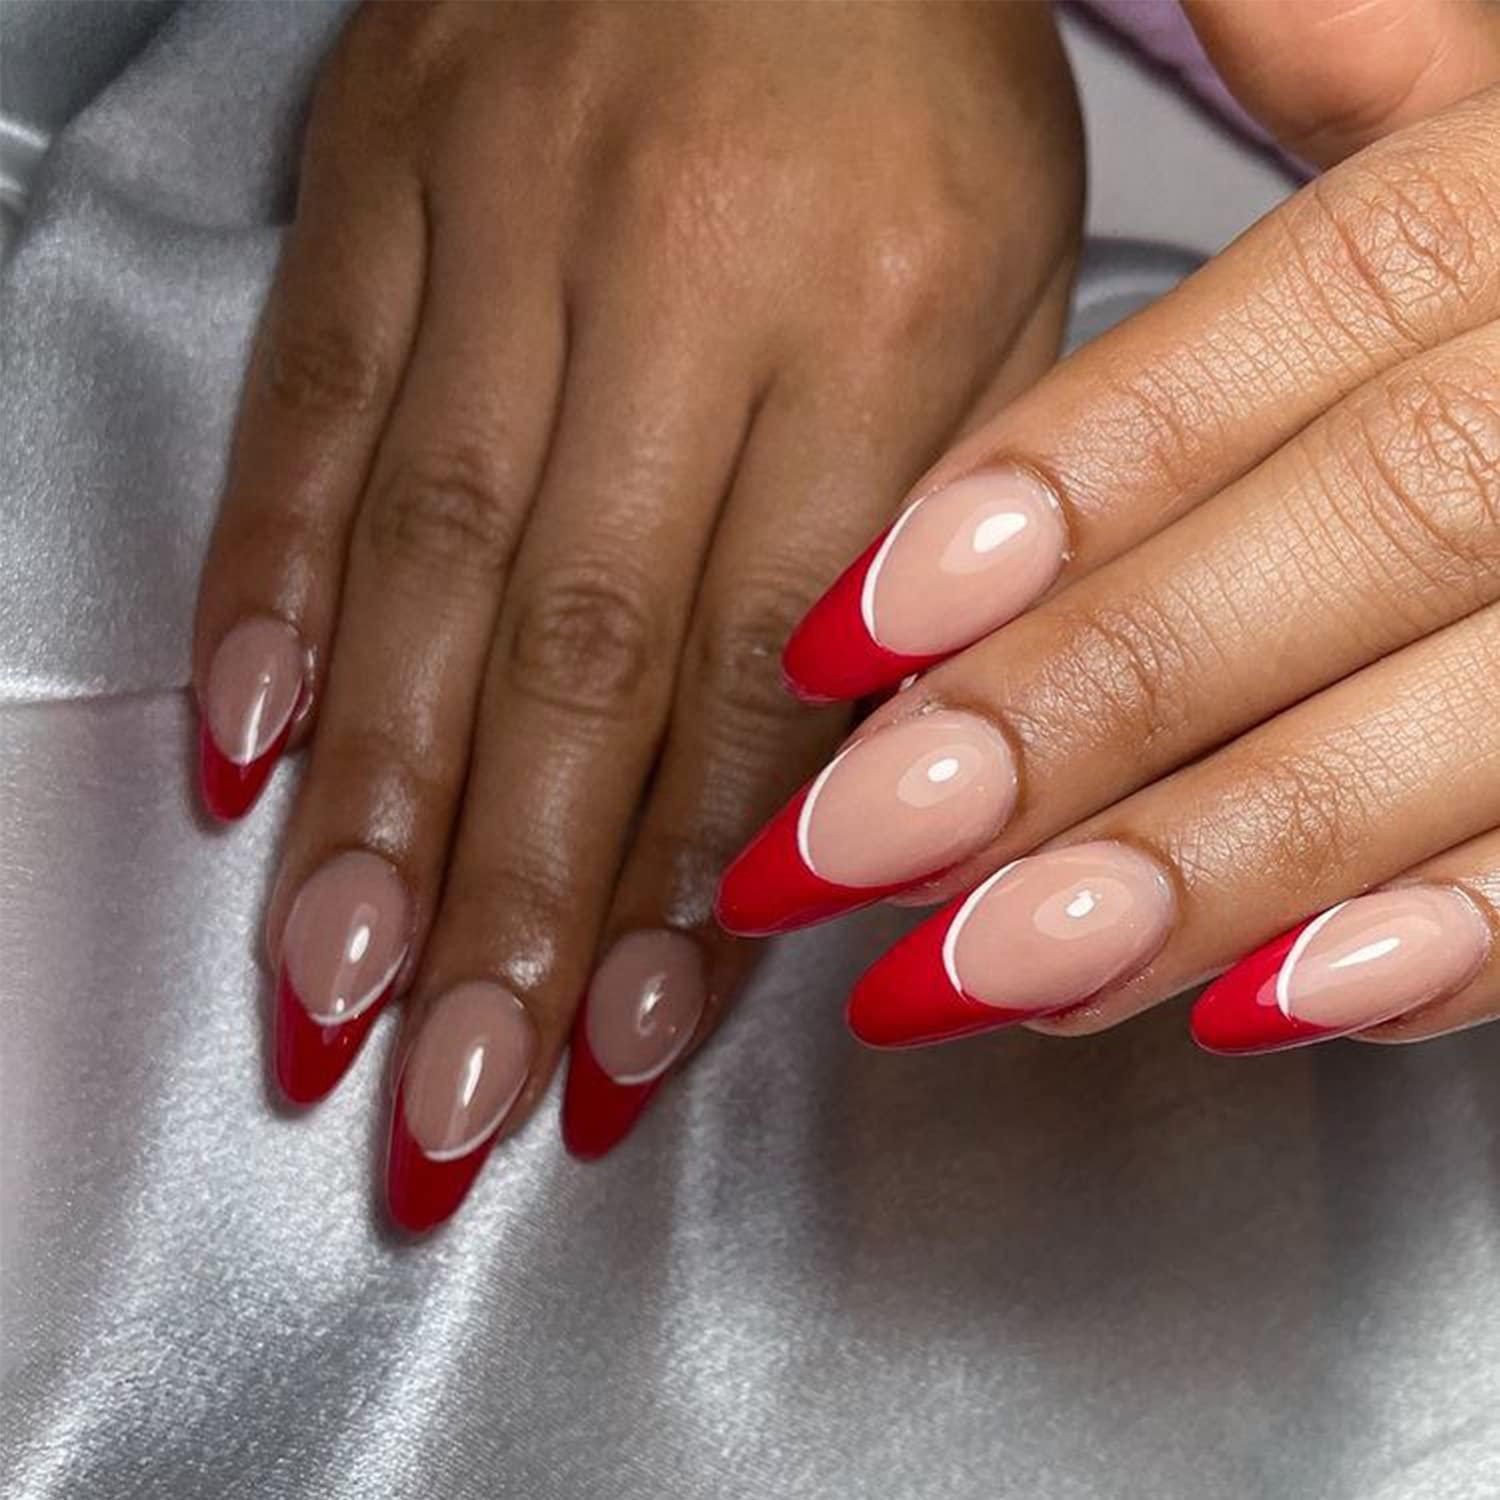 The Nail Corner Glasgow - Sculpted gel nail extensions classic french ombré  | Facebook